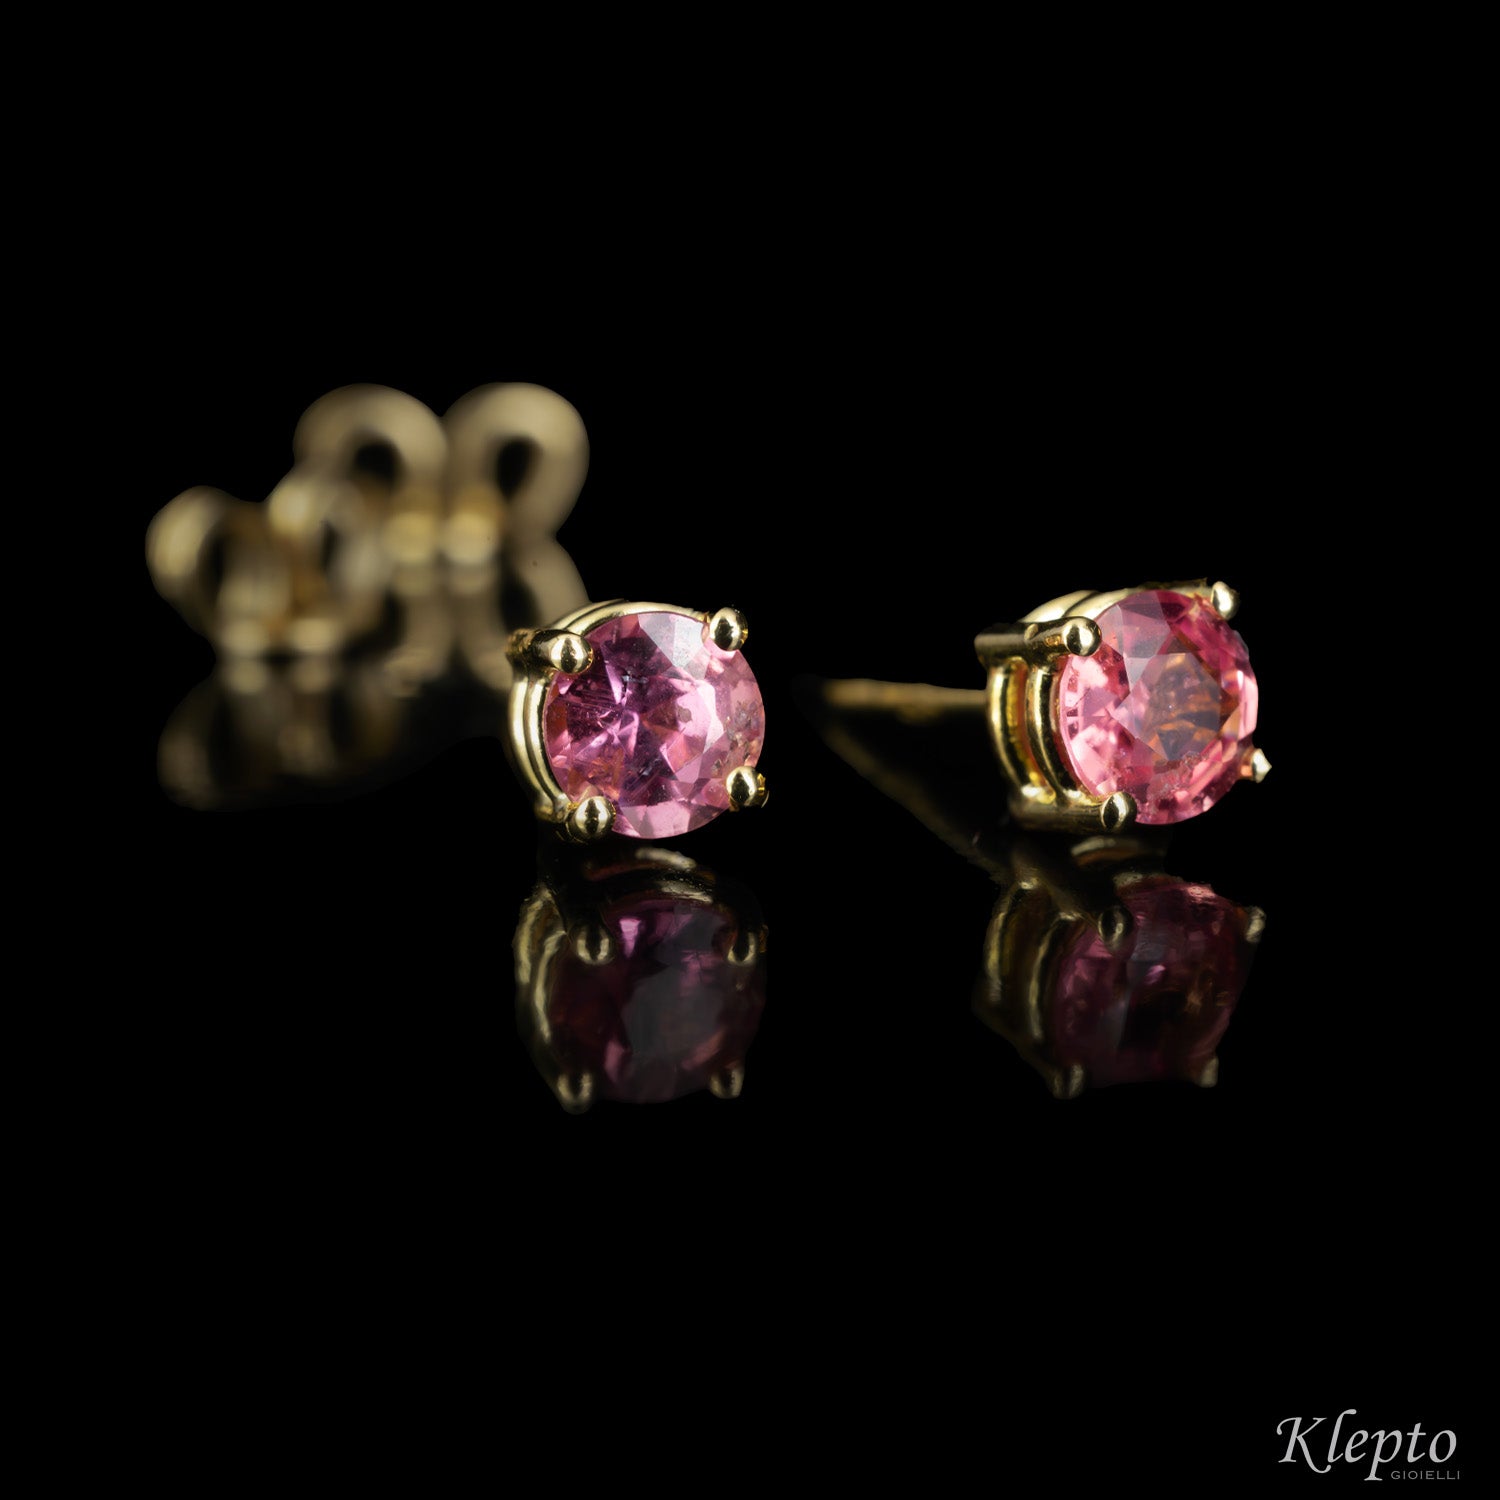 Yellow gold earrings with pink sapphires